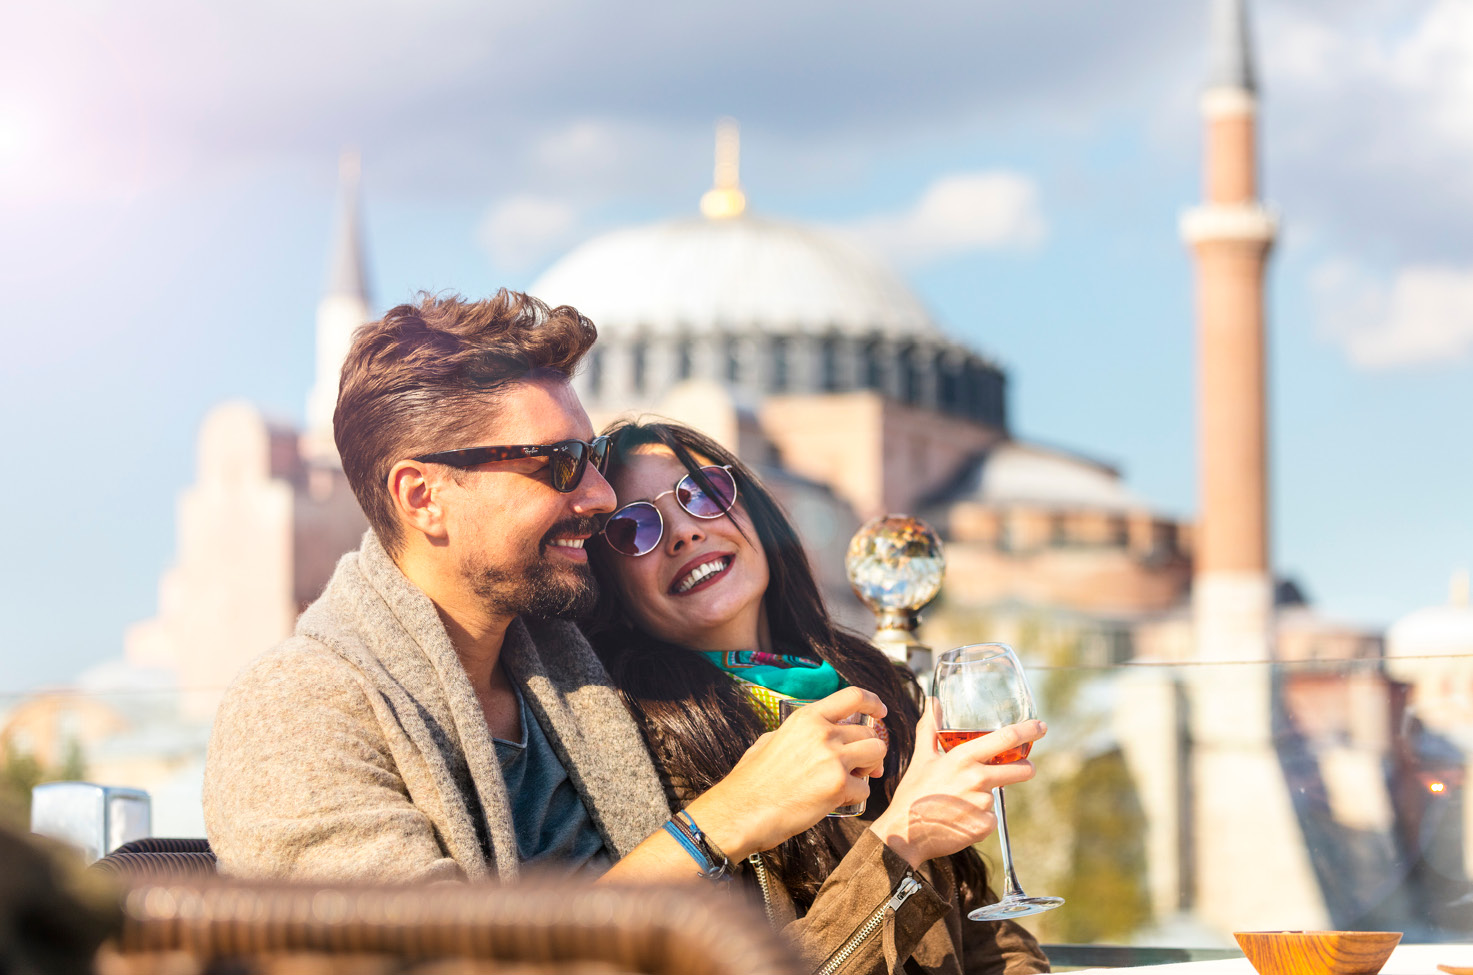 A smiling couple enjoying a glass of wine with views of Istanbul’s Sultanahmet in the background